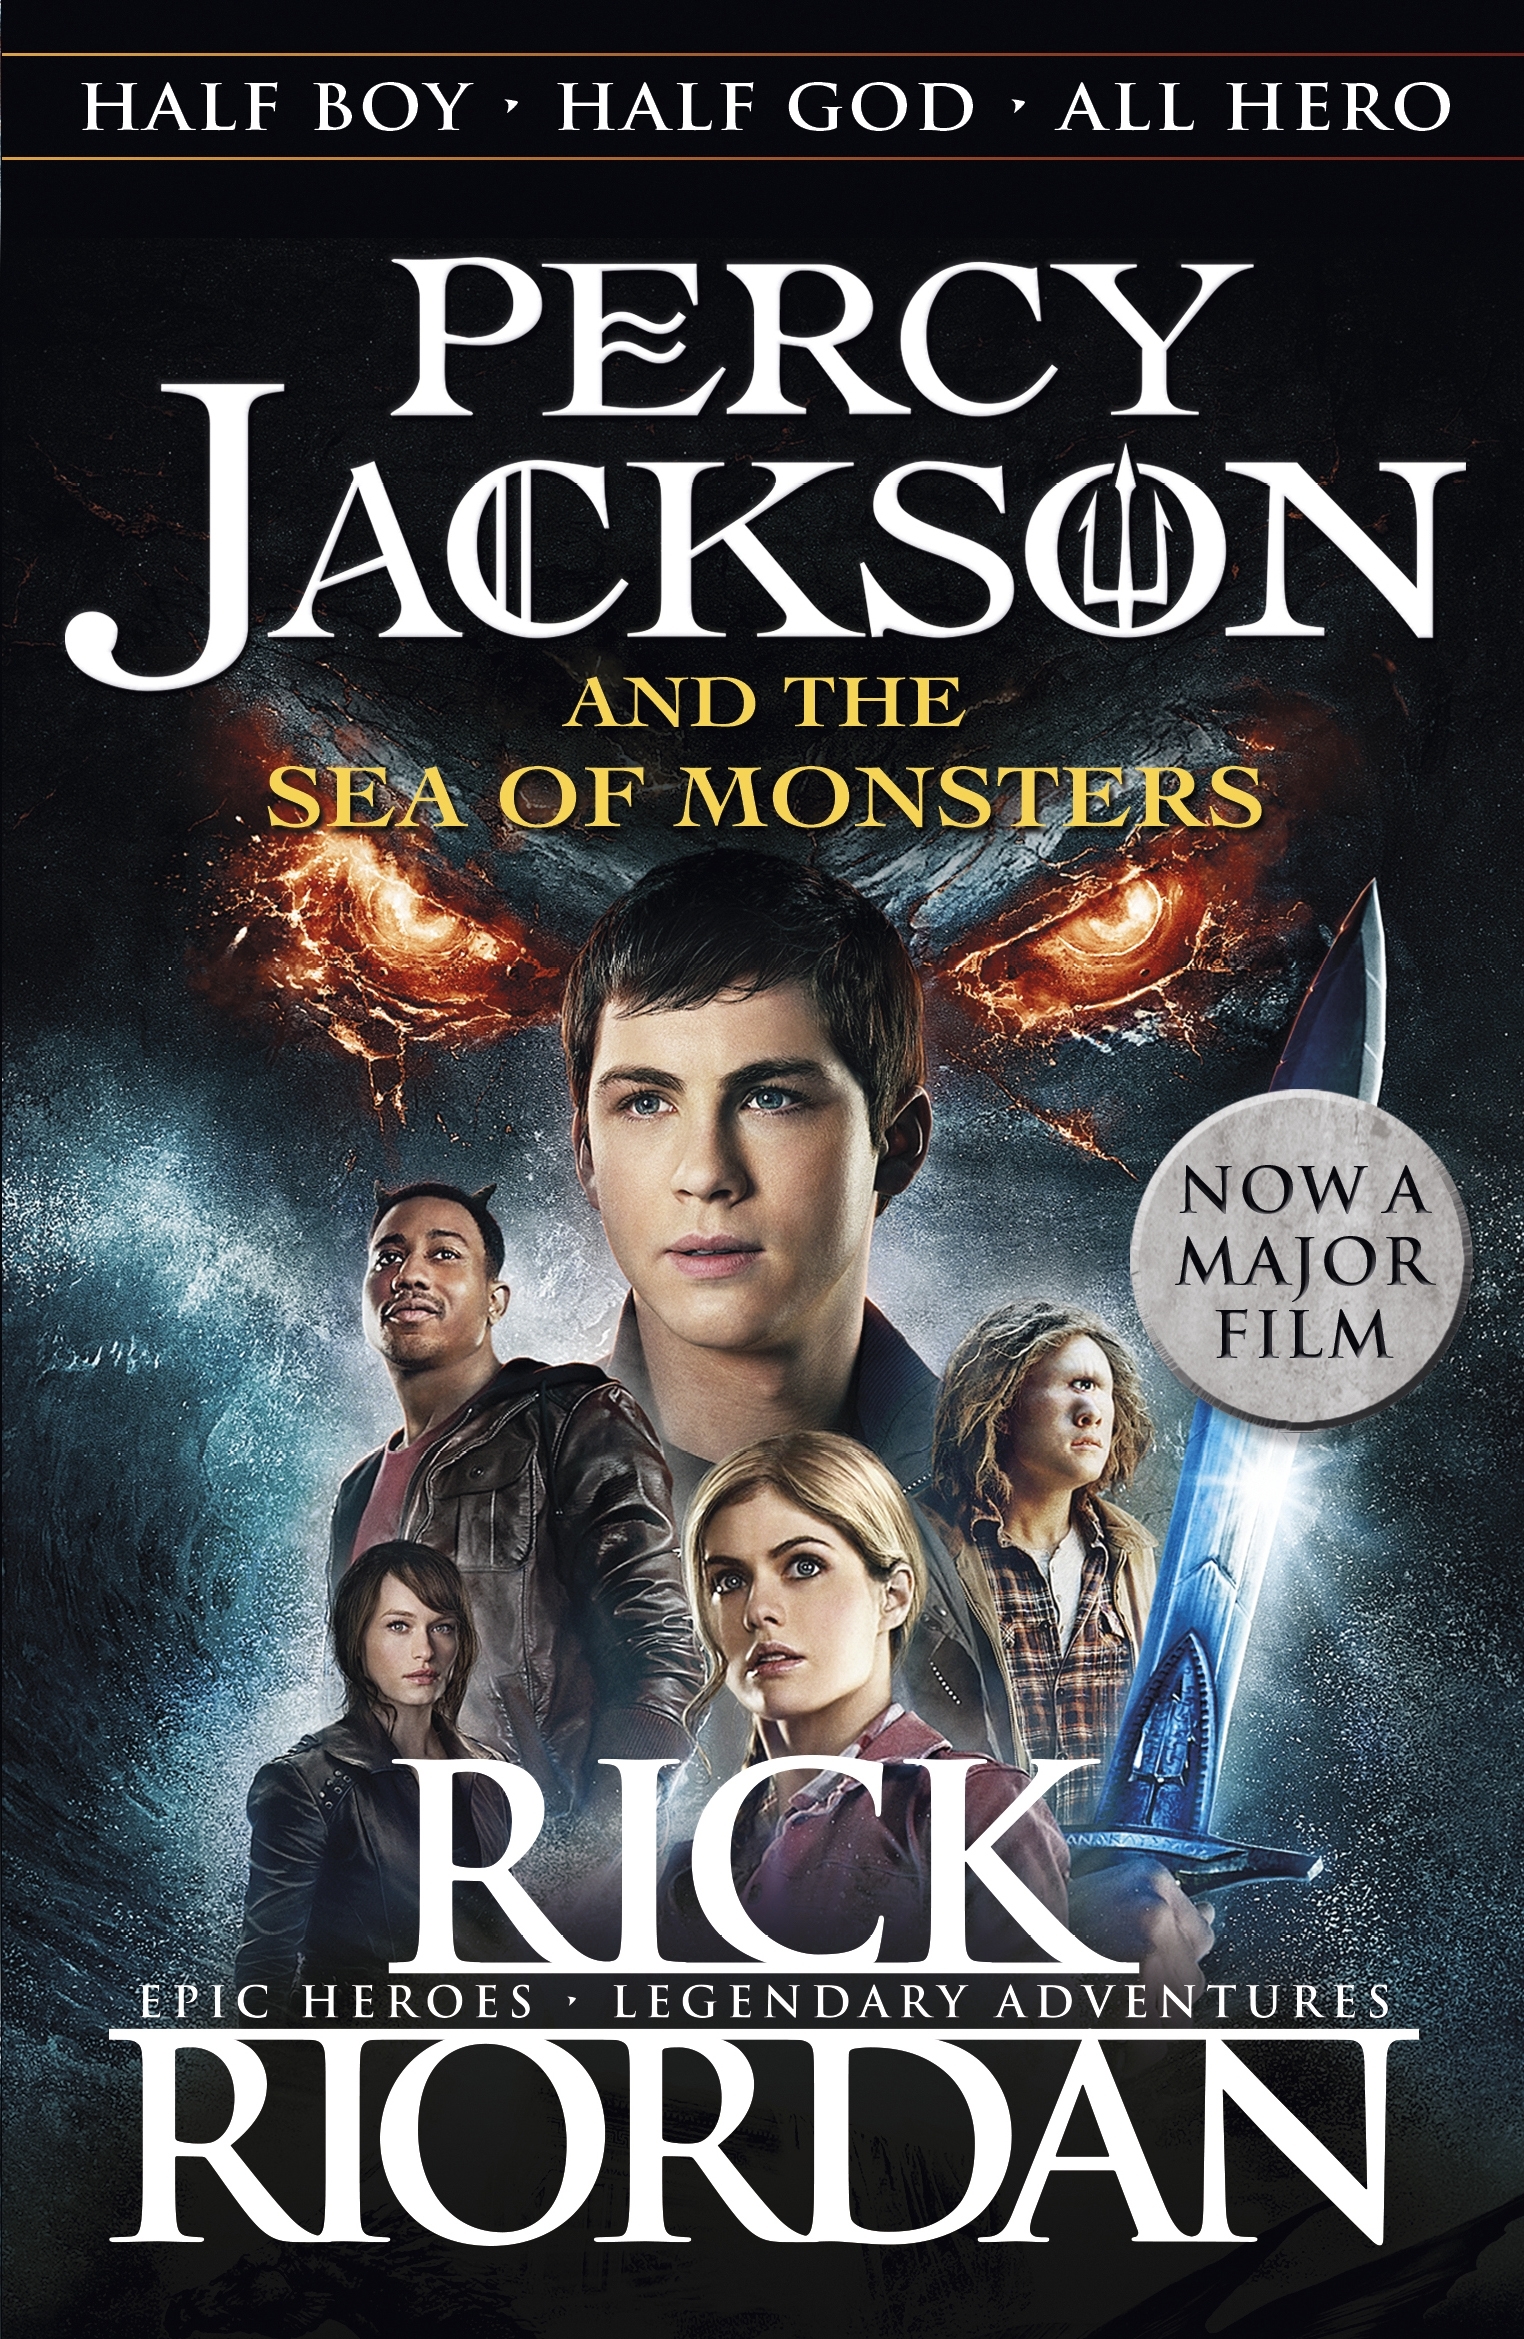 book review for percy jackson and the sea of monsters